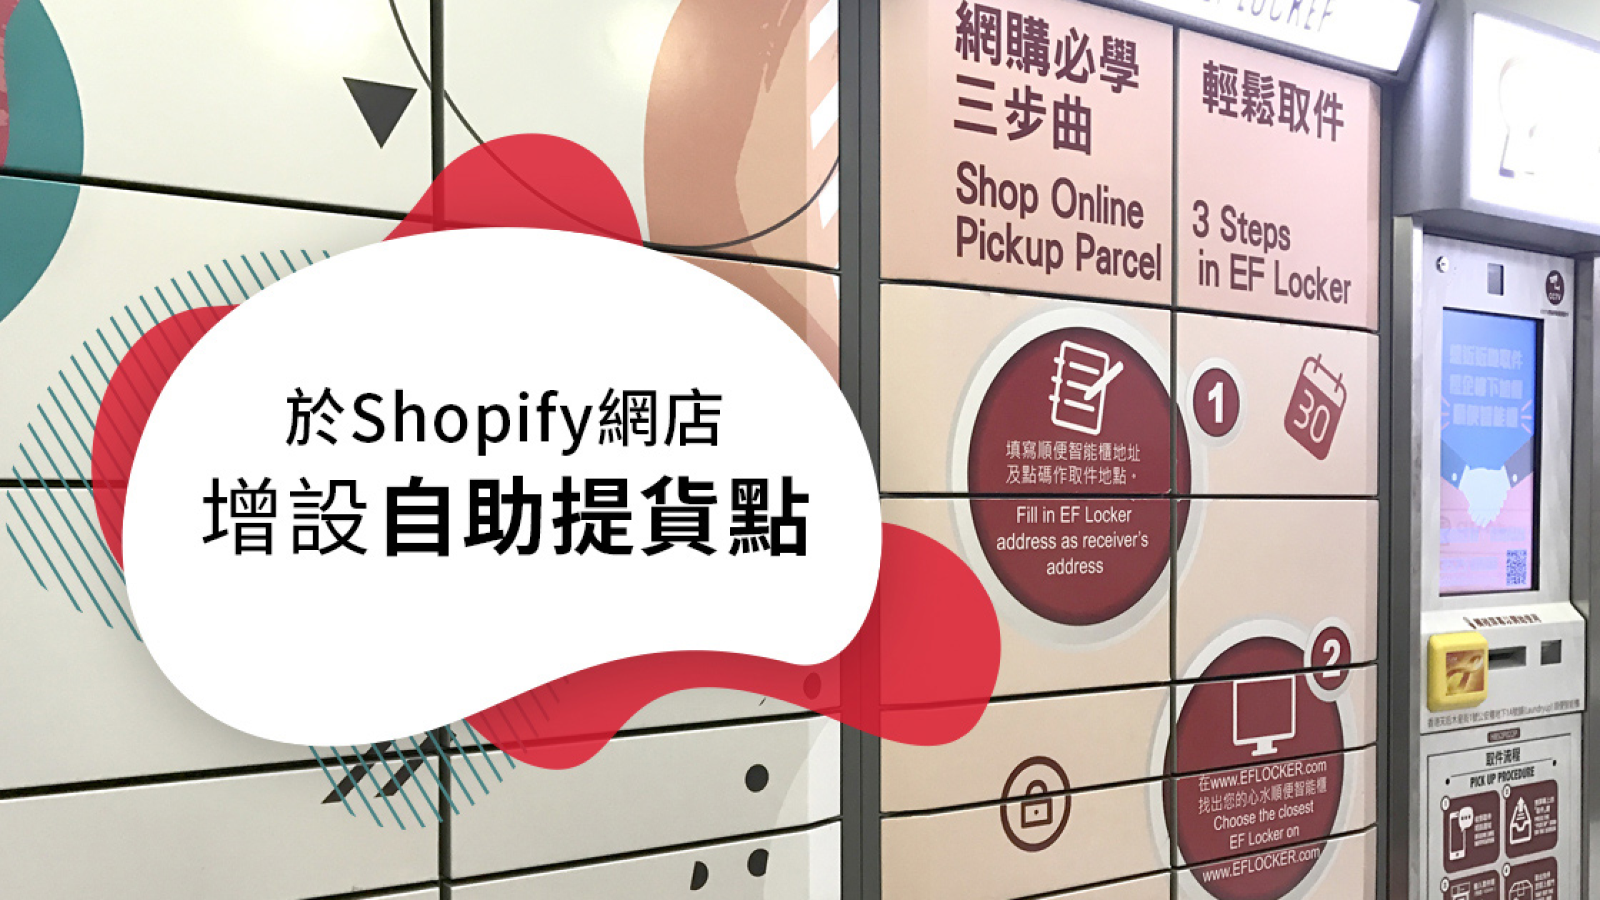 Print S.F Express shipping labels directly on Shopify